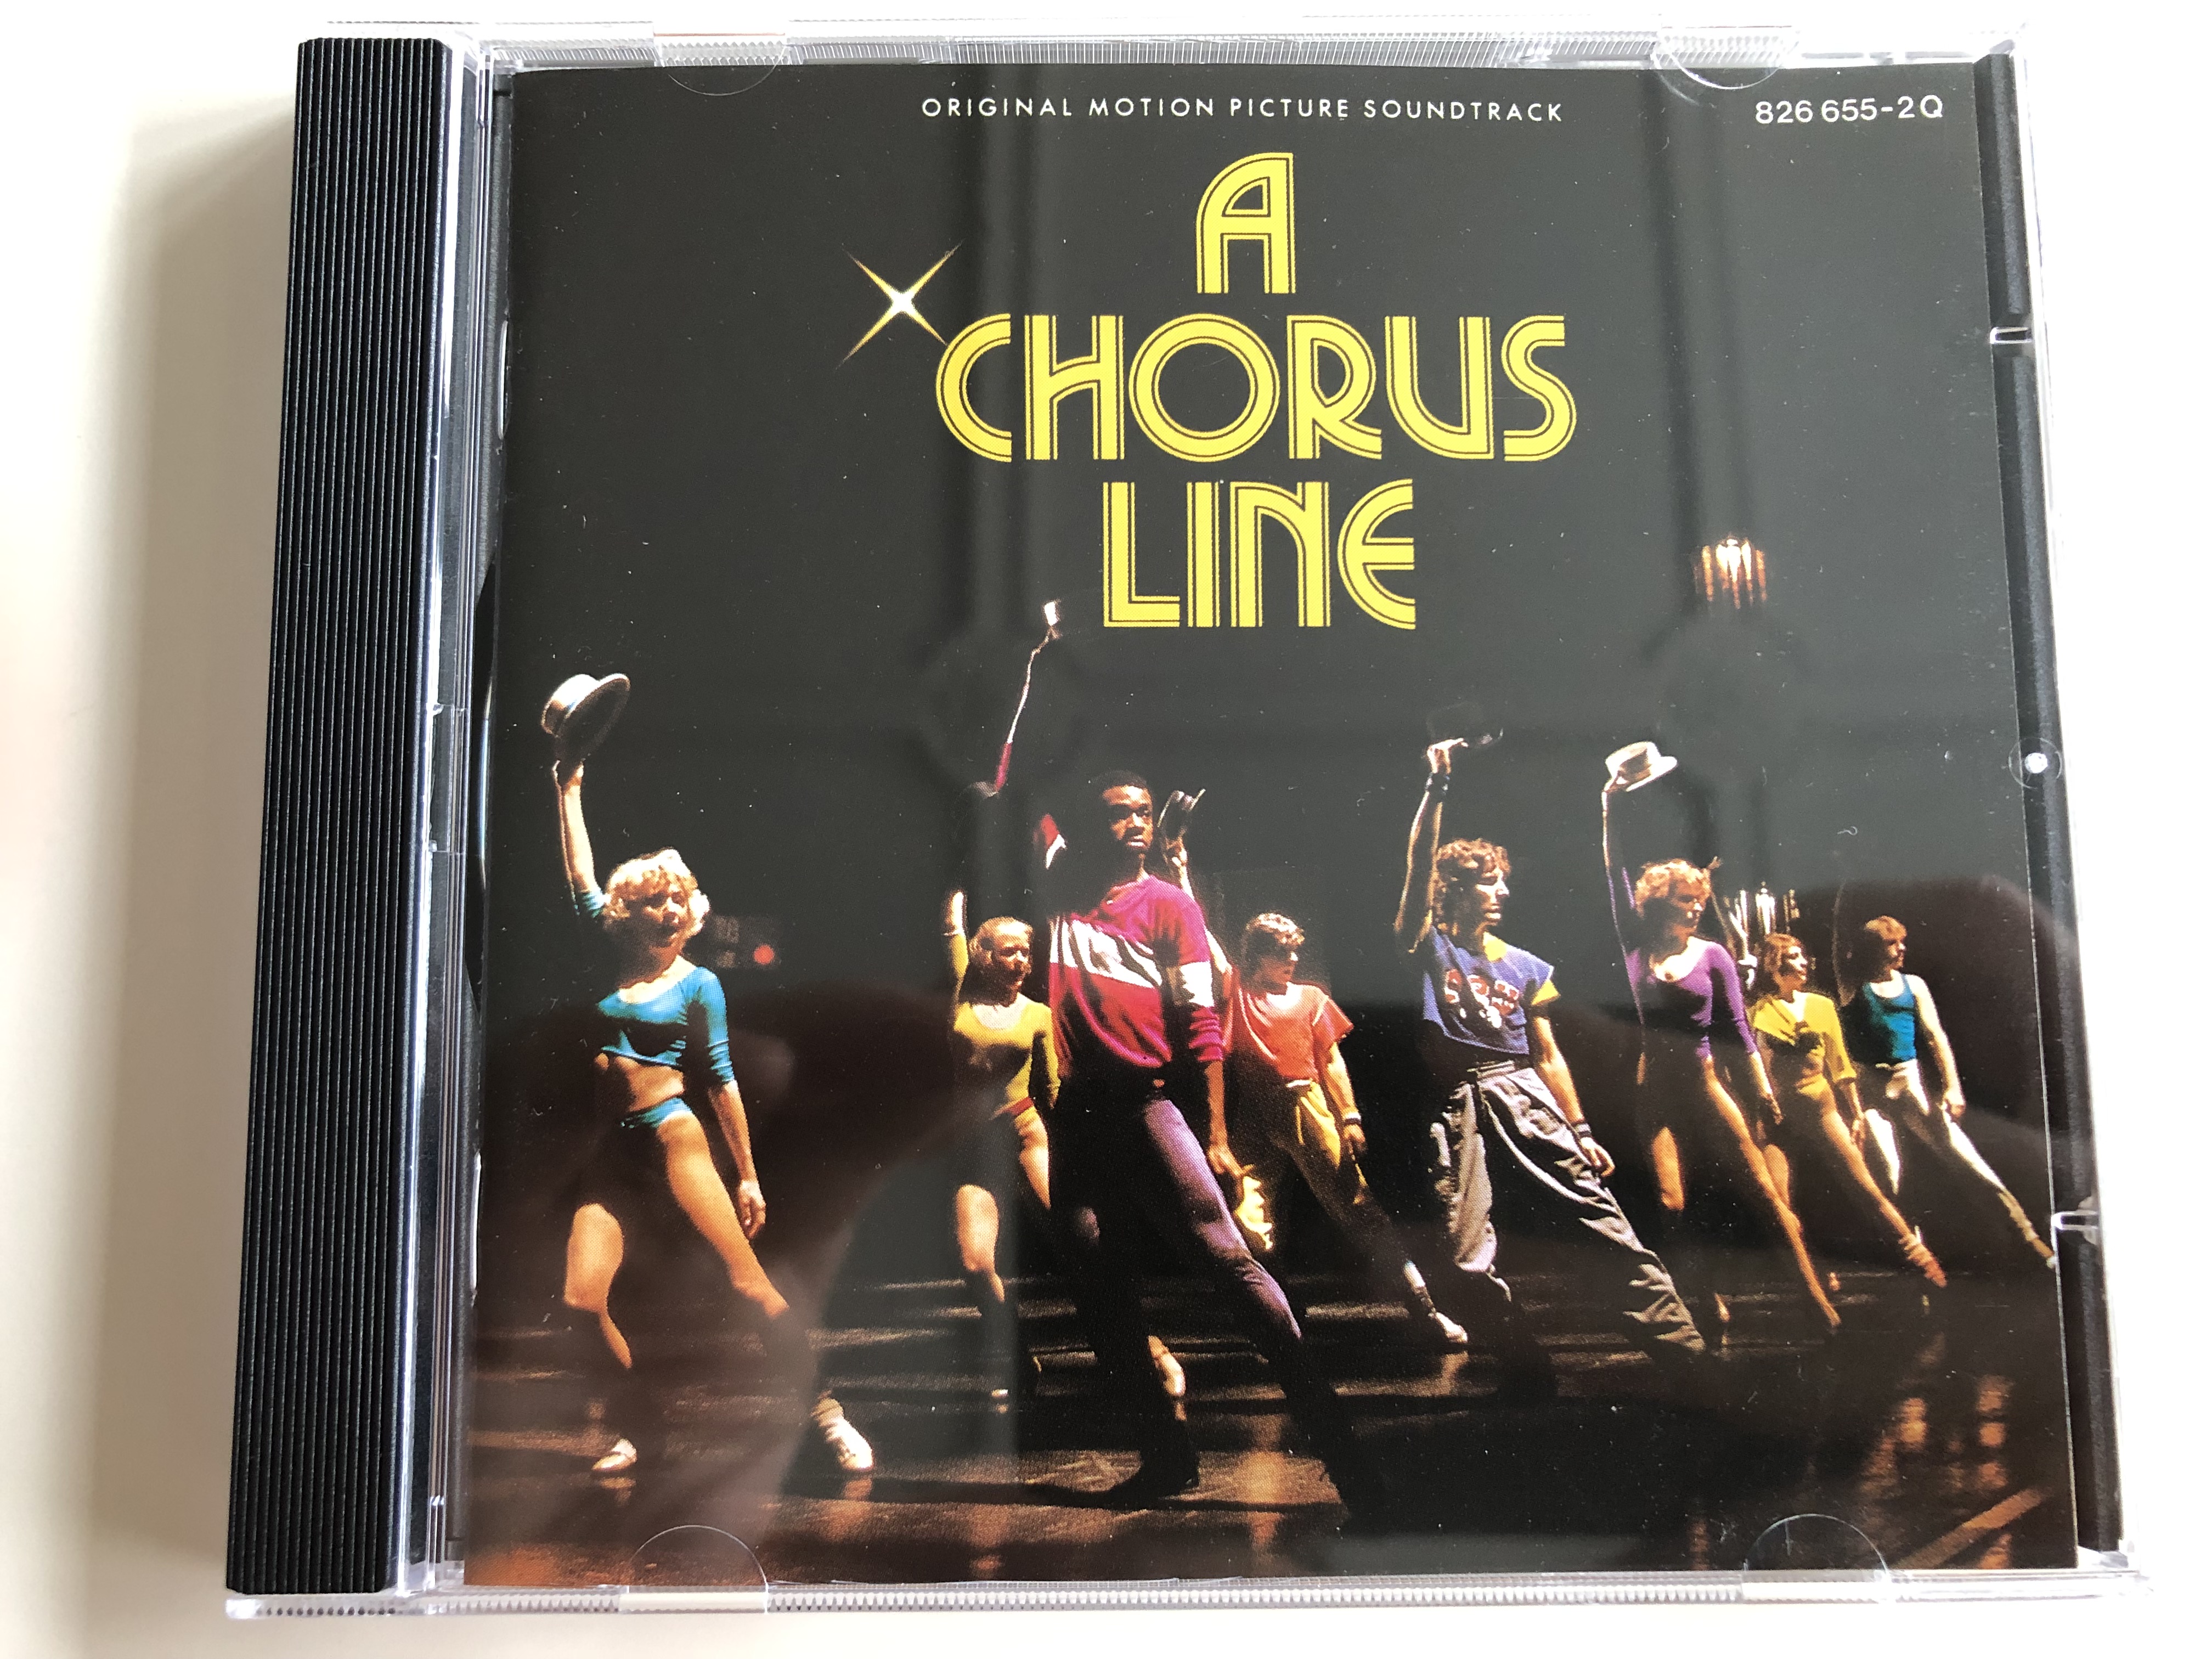 a-chorus-line-original-motion-picture-soundtrack-i-hope-i-get-it-i-can-do-that-surprise-surprise-nothing-what-i-did-for-love-audio-cd-1985-826-655-2-q-.jpg